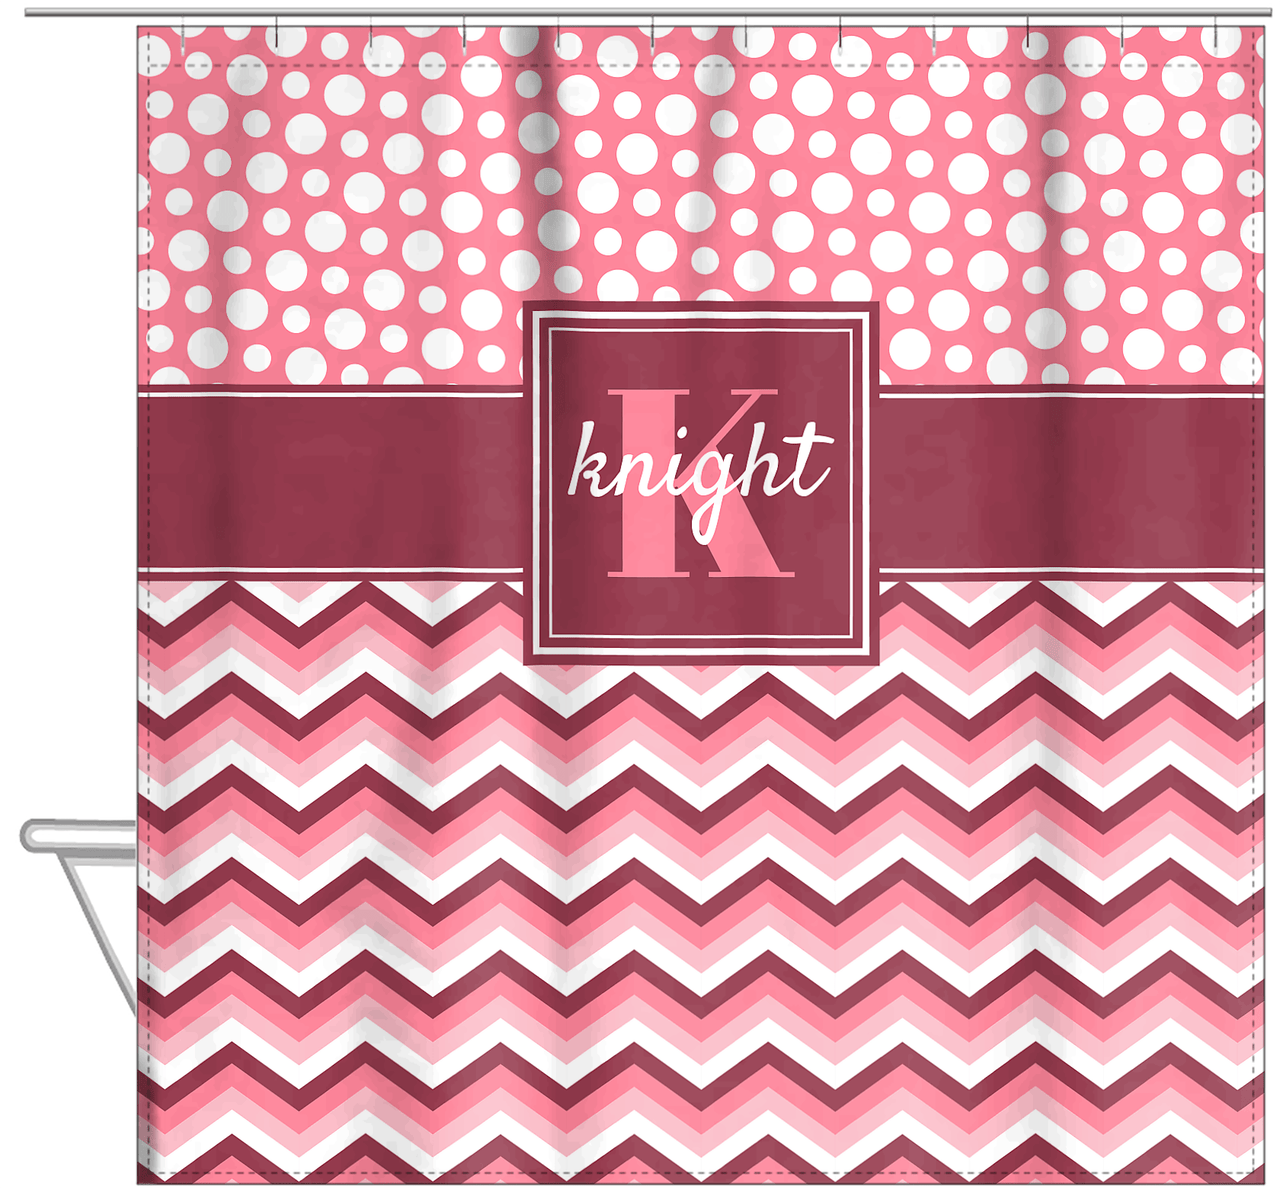 Personalized Polka Dots and Chevron II Shower Curtain - Pink and White - Square Nameplate - Hanging View